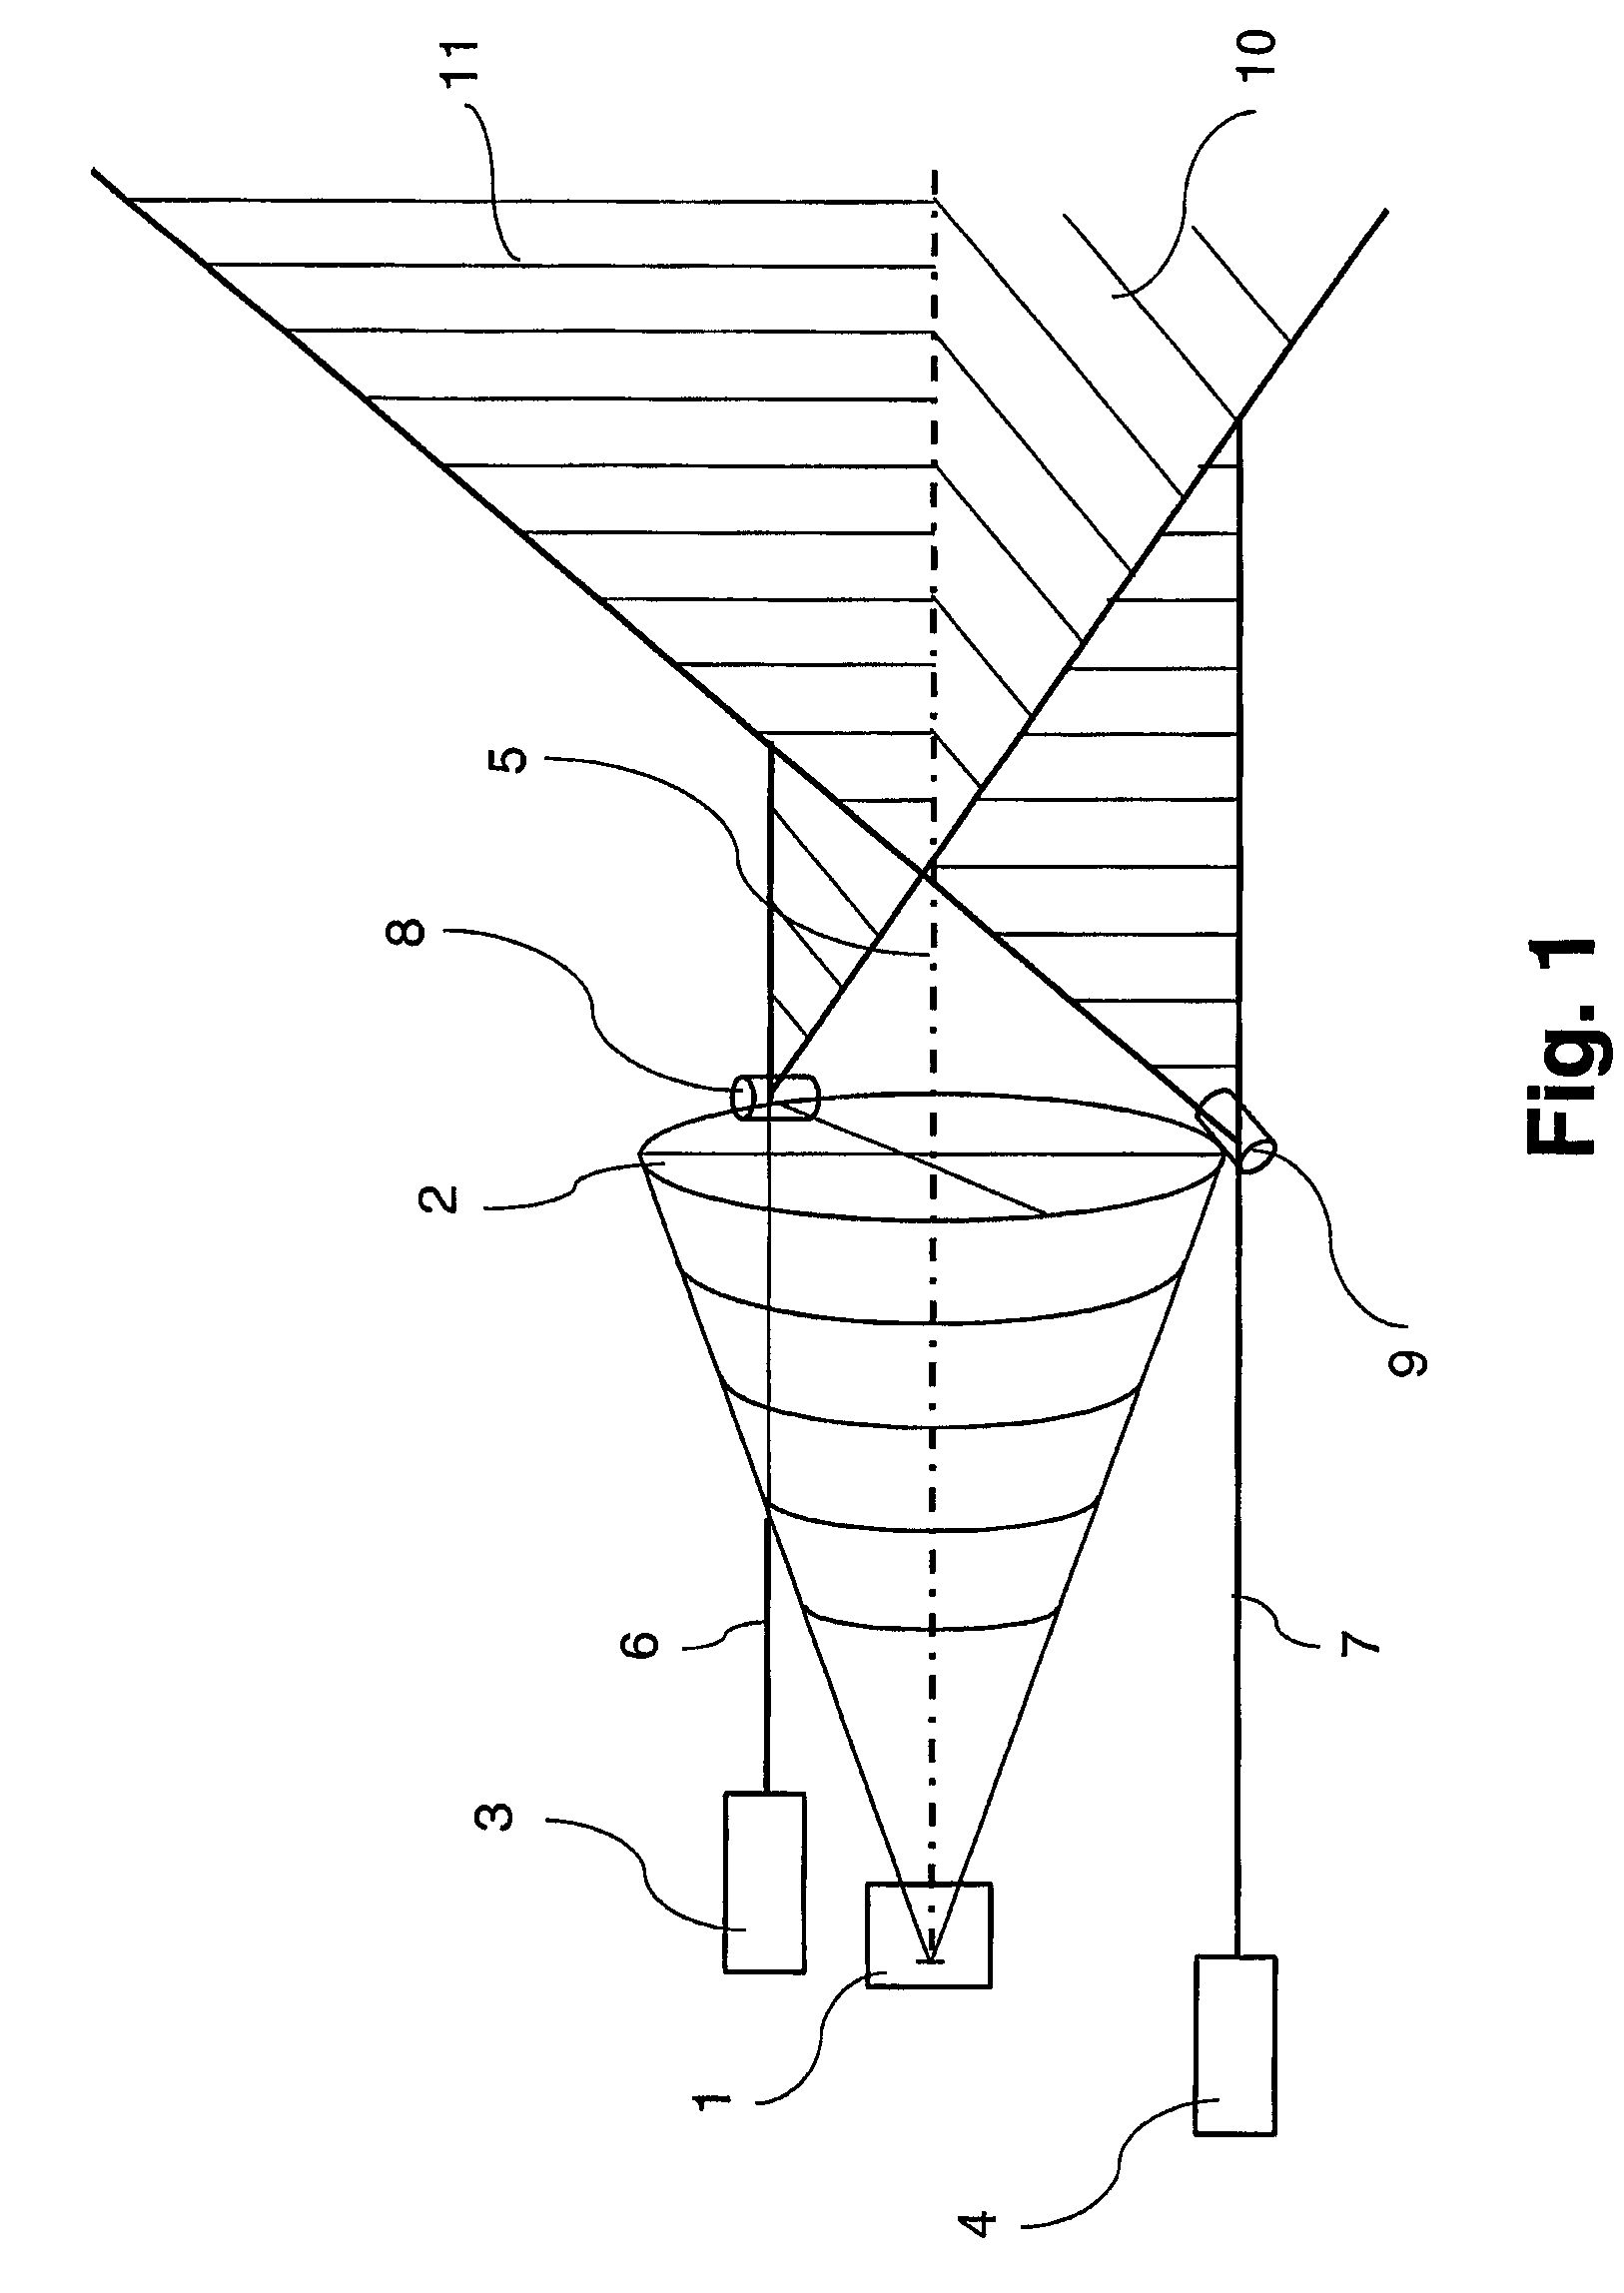 Sighting device and additional device for measuring, working, and/or operating with or without contact